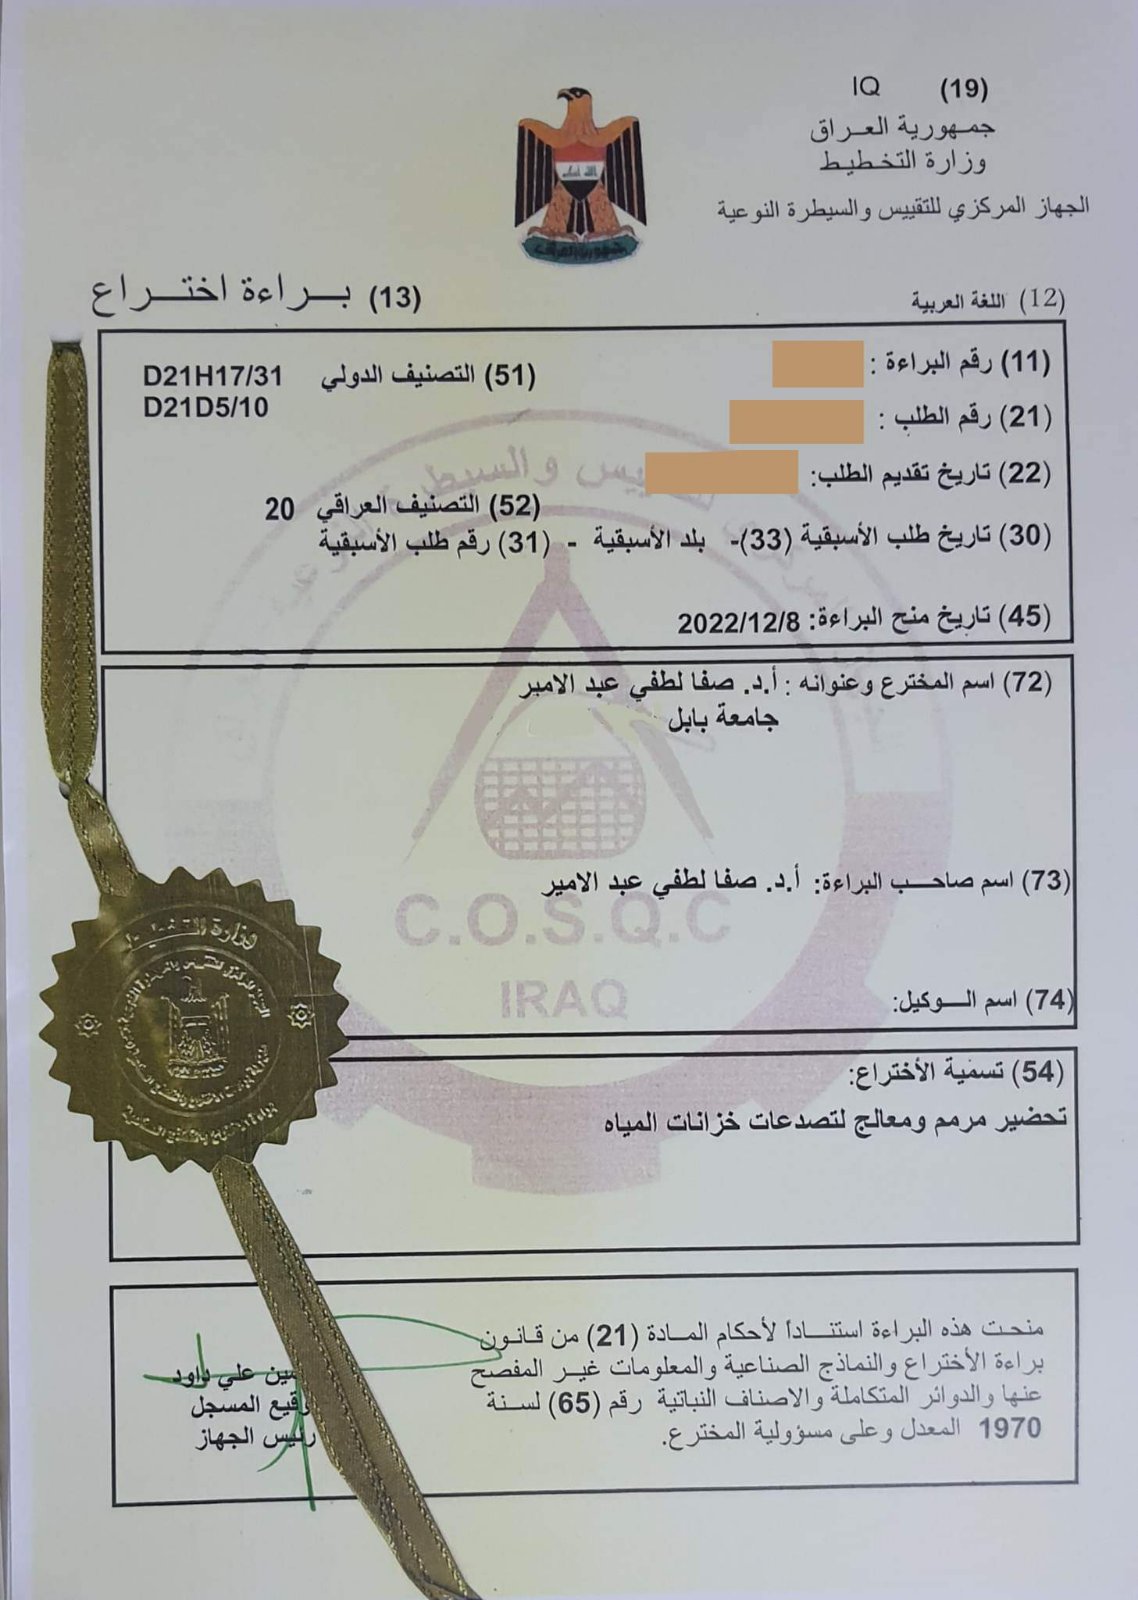 Prof. Dr. Safa Lutfi (Chairman of the Patents and Industrial Design Exhibitions Committee at the Iraqi International Creativity and Innovation Forum) obtained a new patent, which is tagged: (Preparation of a restorer and treatment of cracks in water tanks).  P